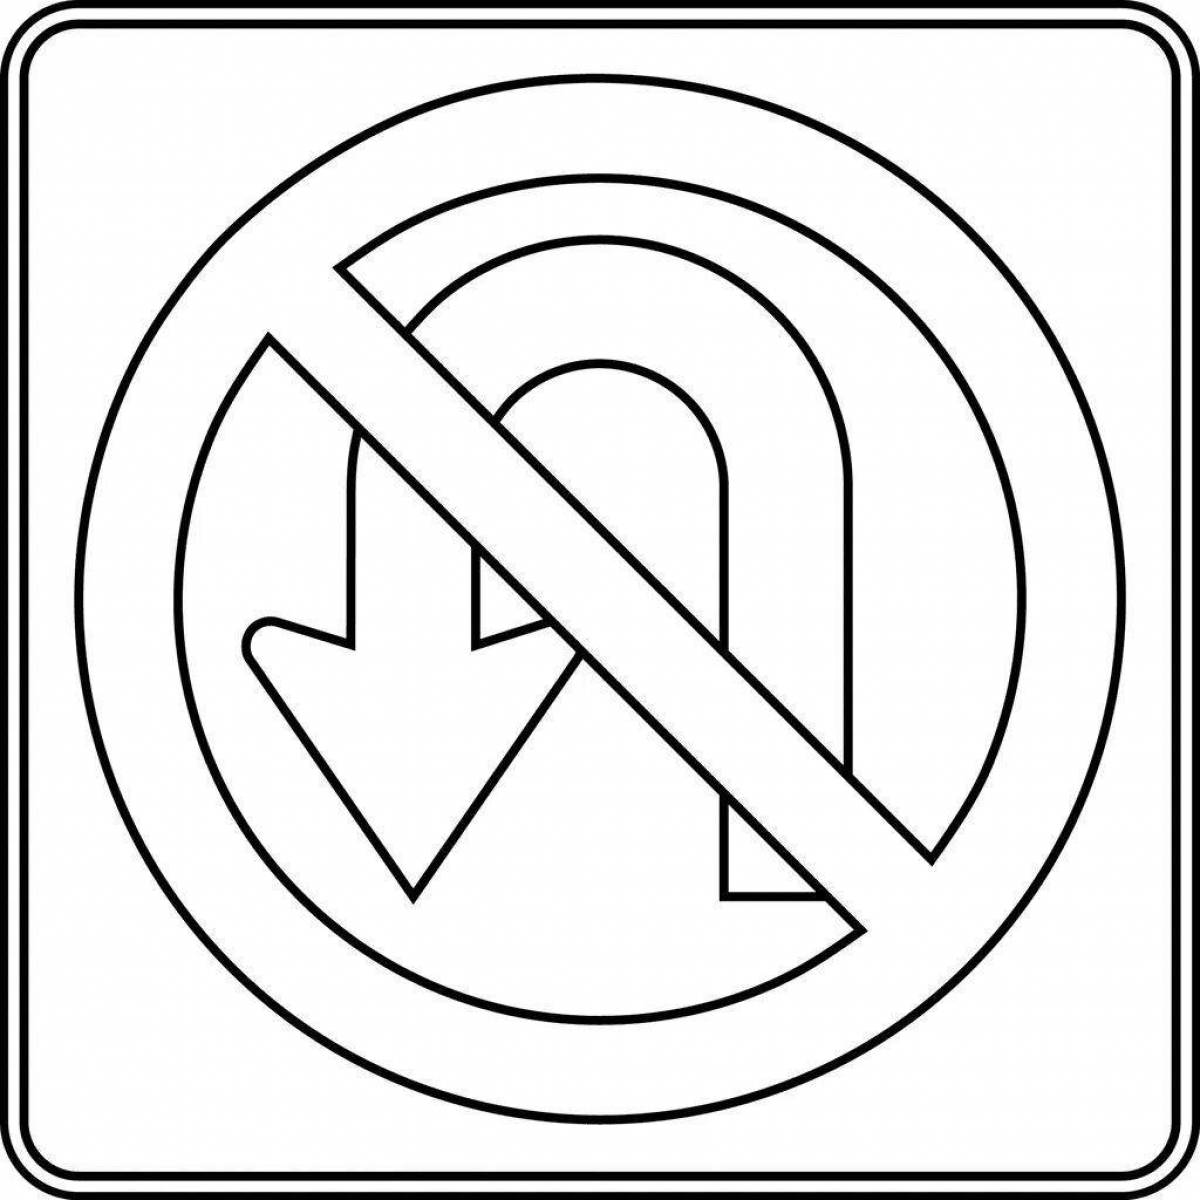 Coloring page dramatic prohibition road sign